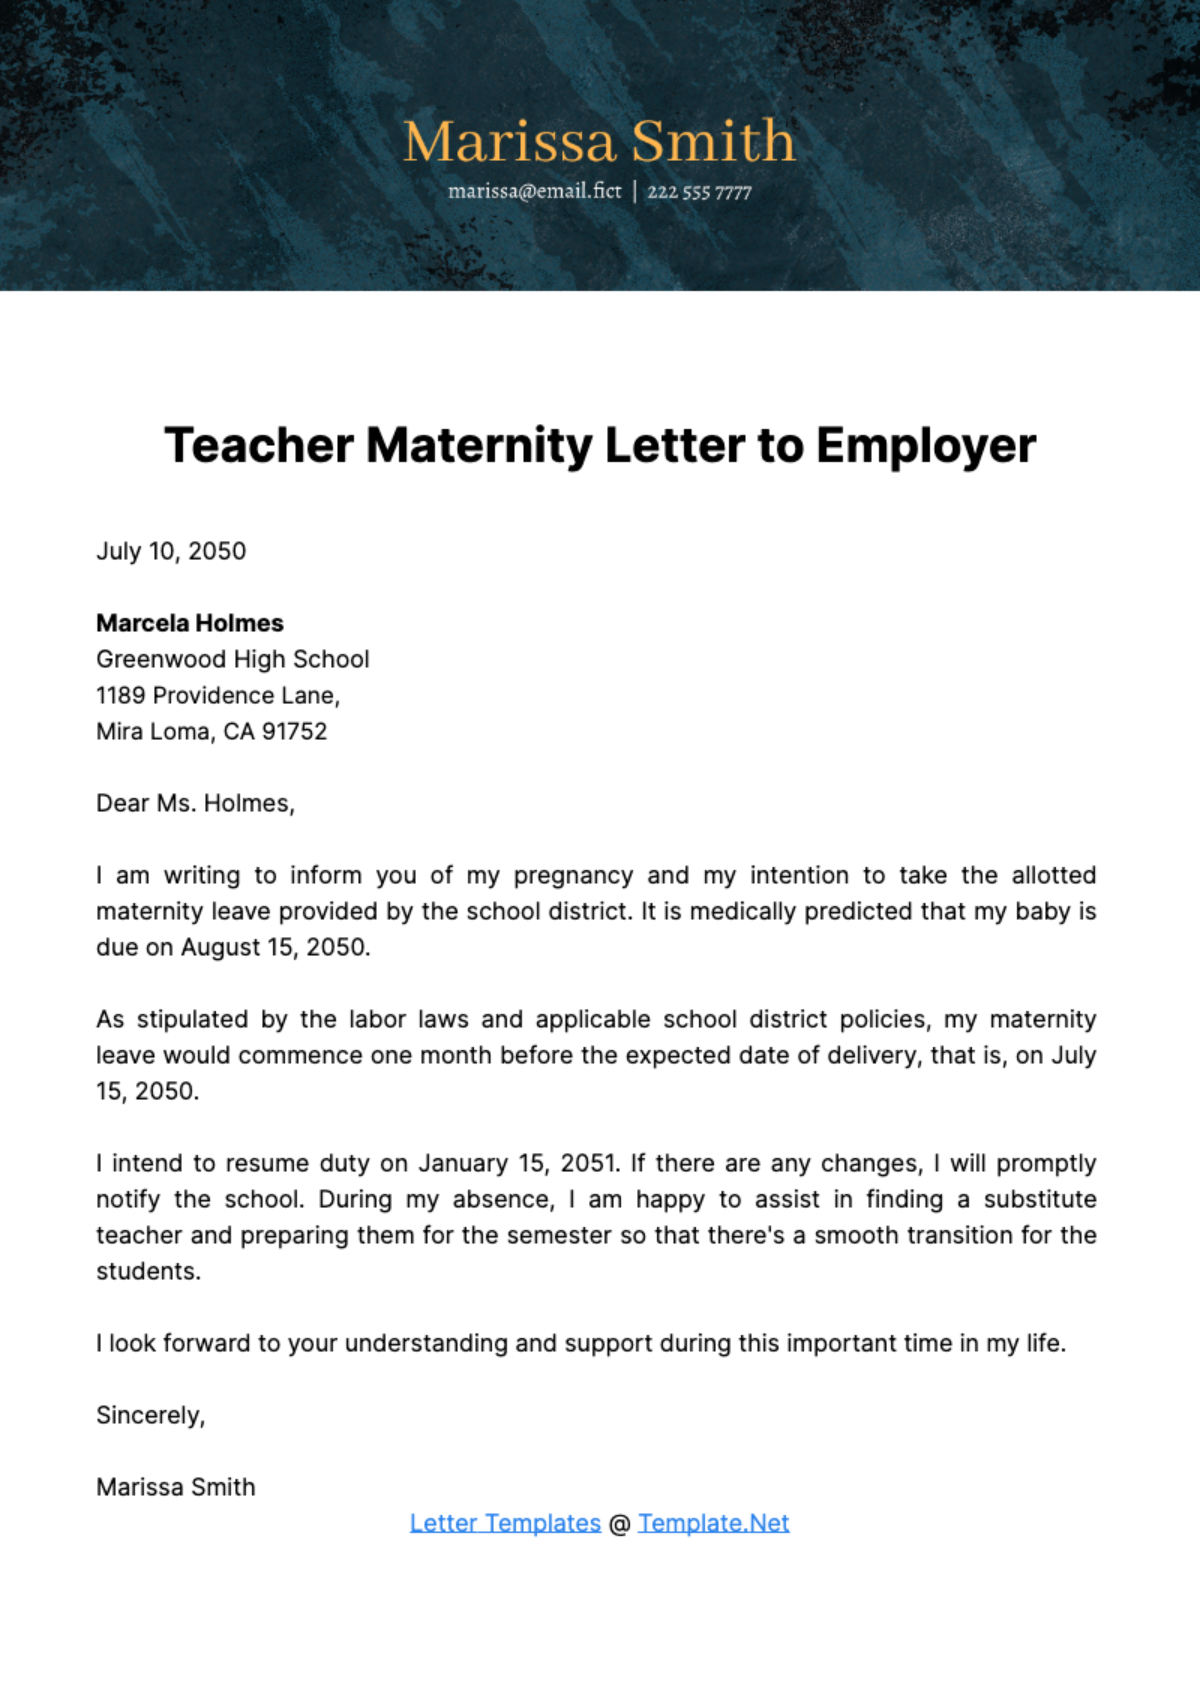 Free Teacher Maternity Letter to Employer Template